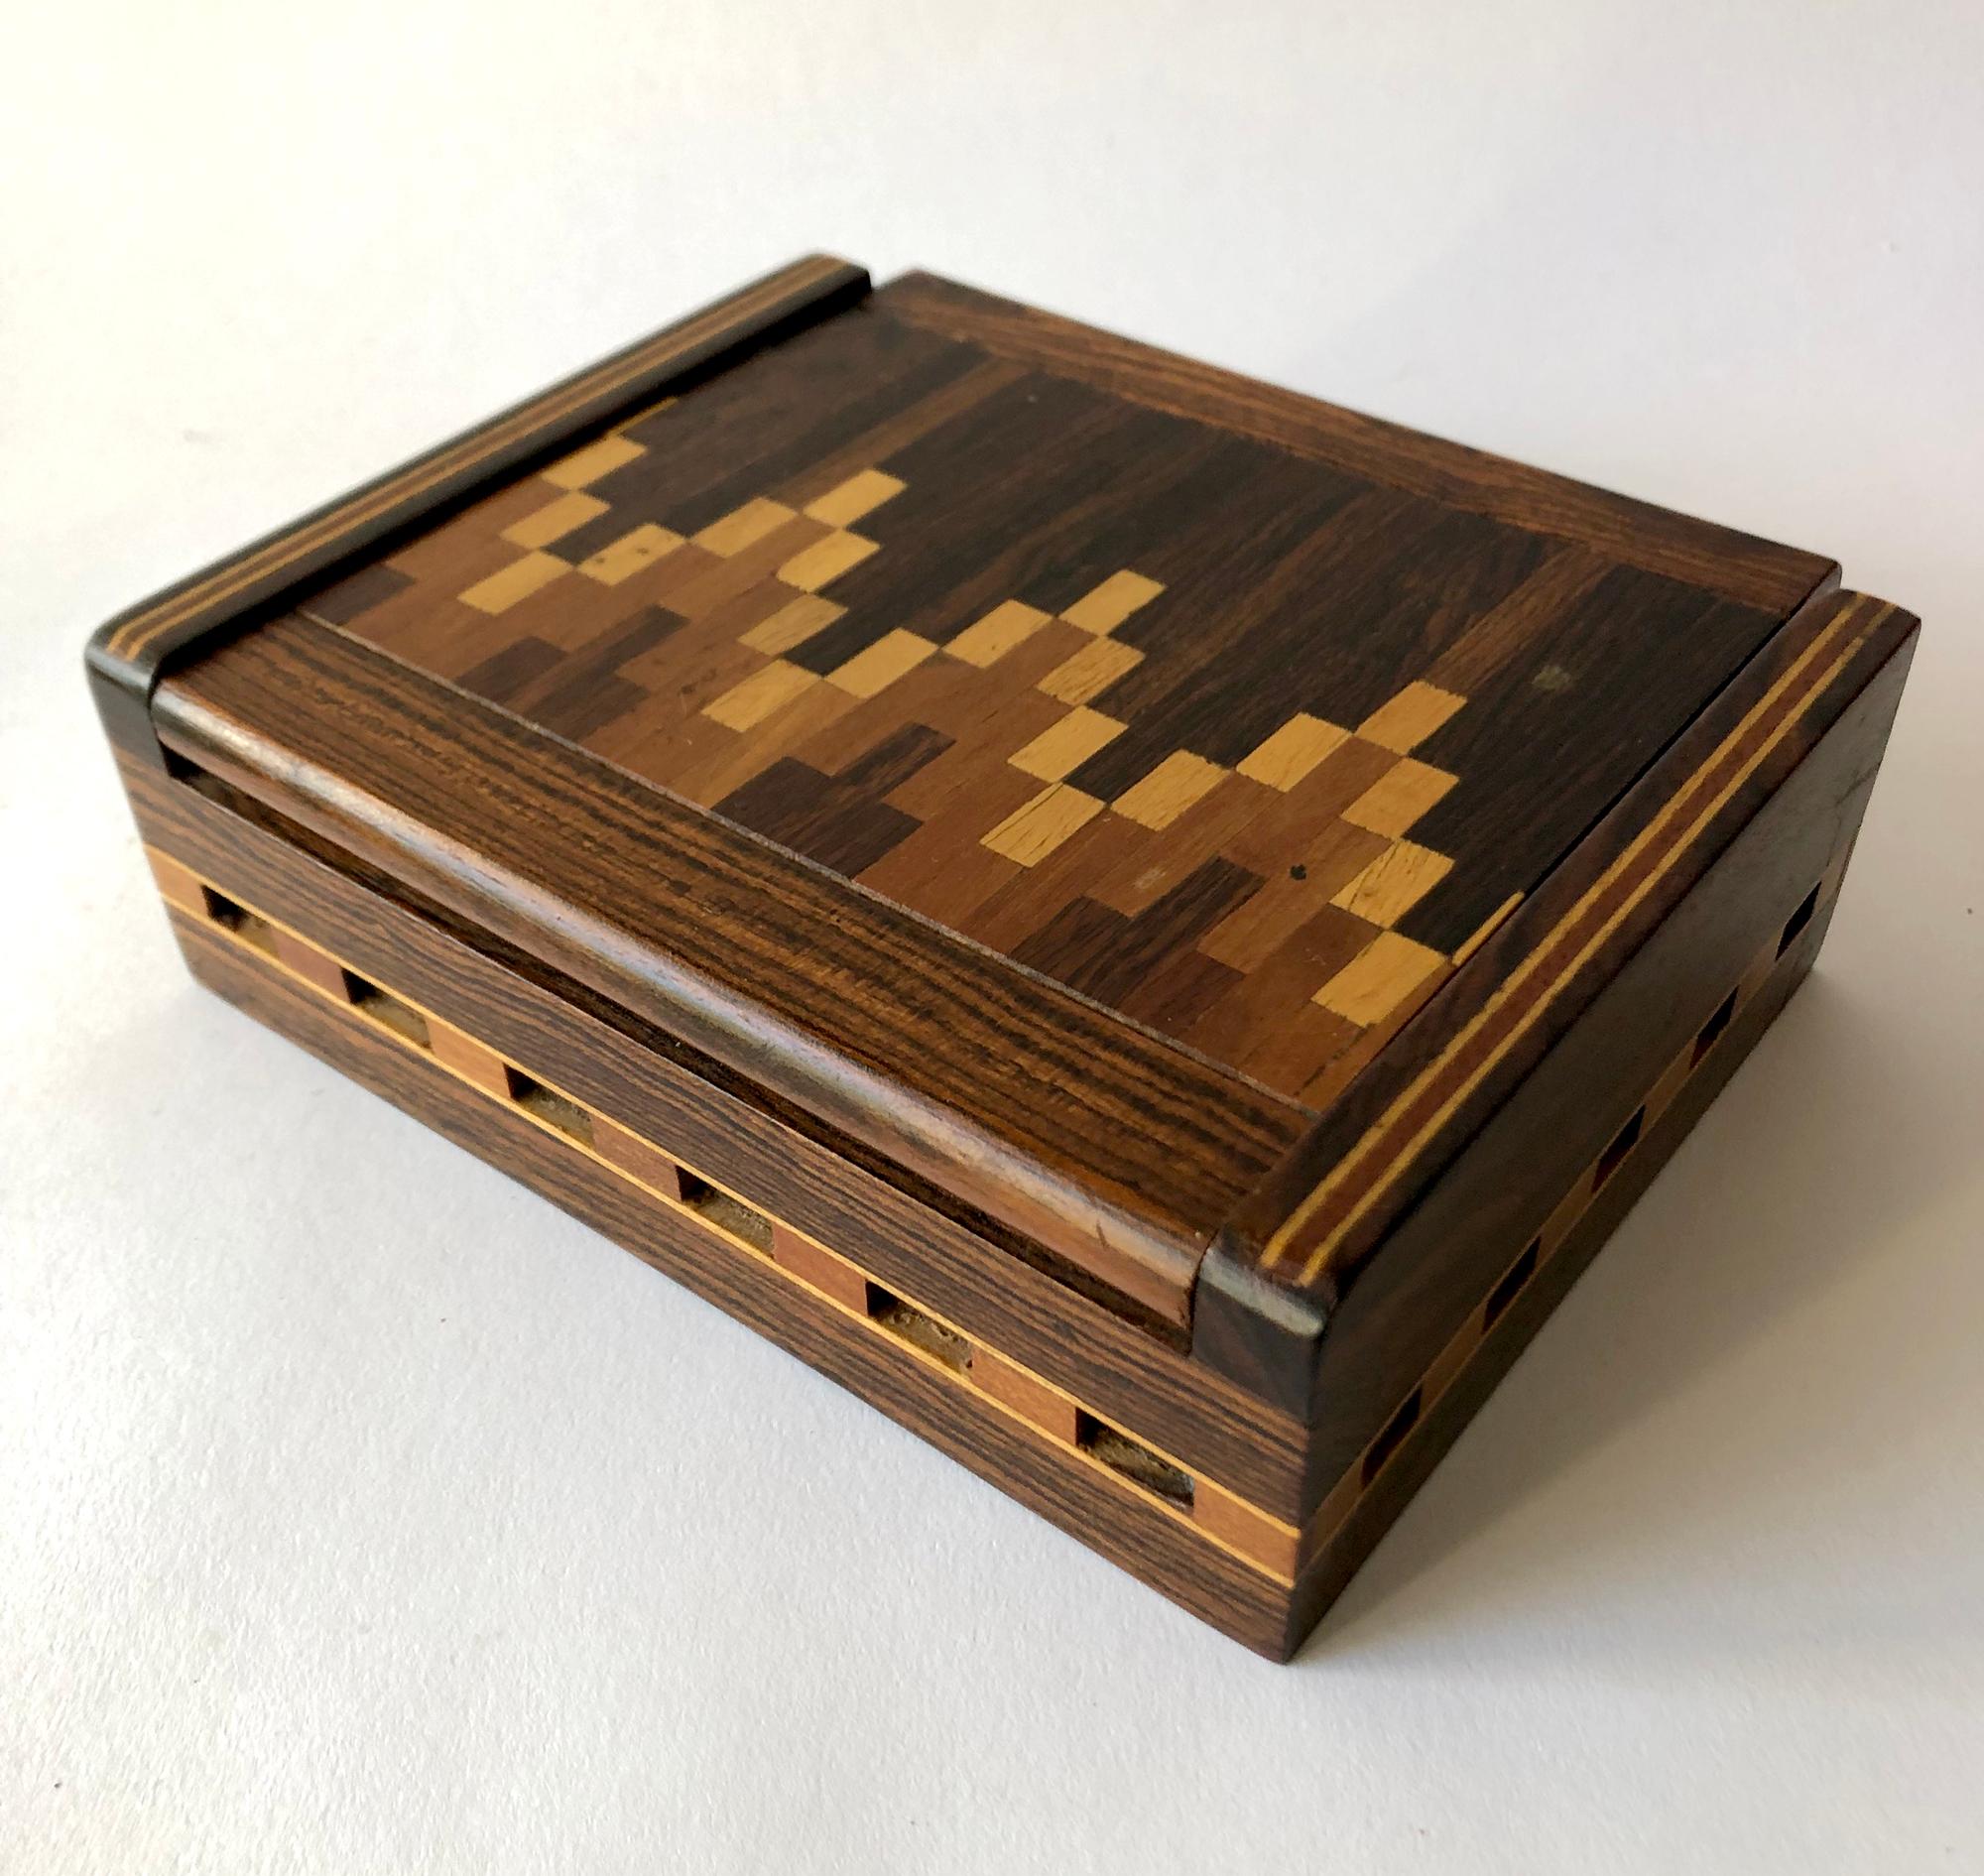 Inlaid mixed woods parquetry box created by Don Shoemaker, circa 1960s. Box measures 2.25